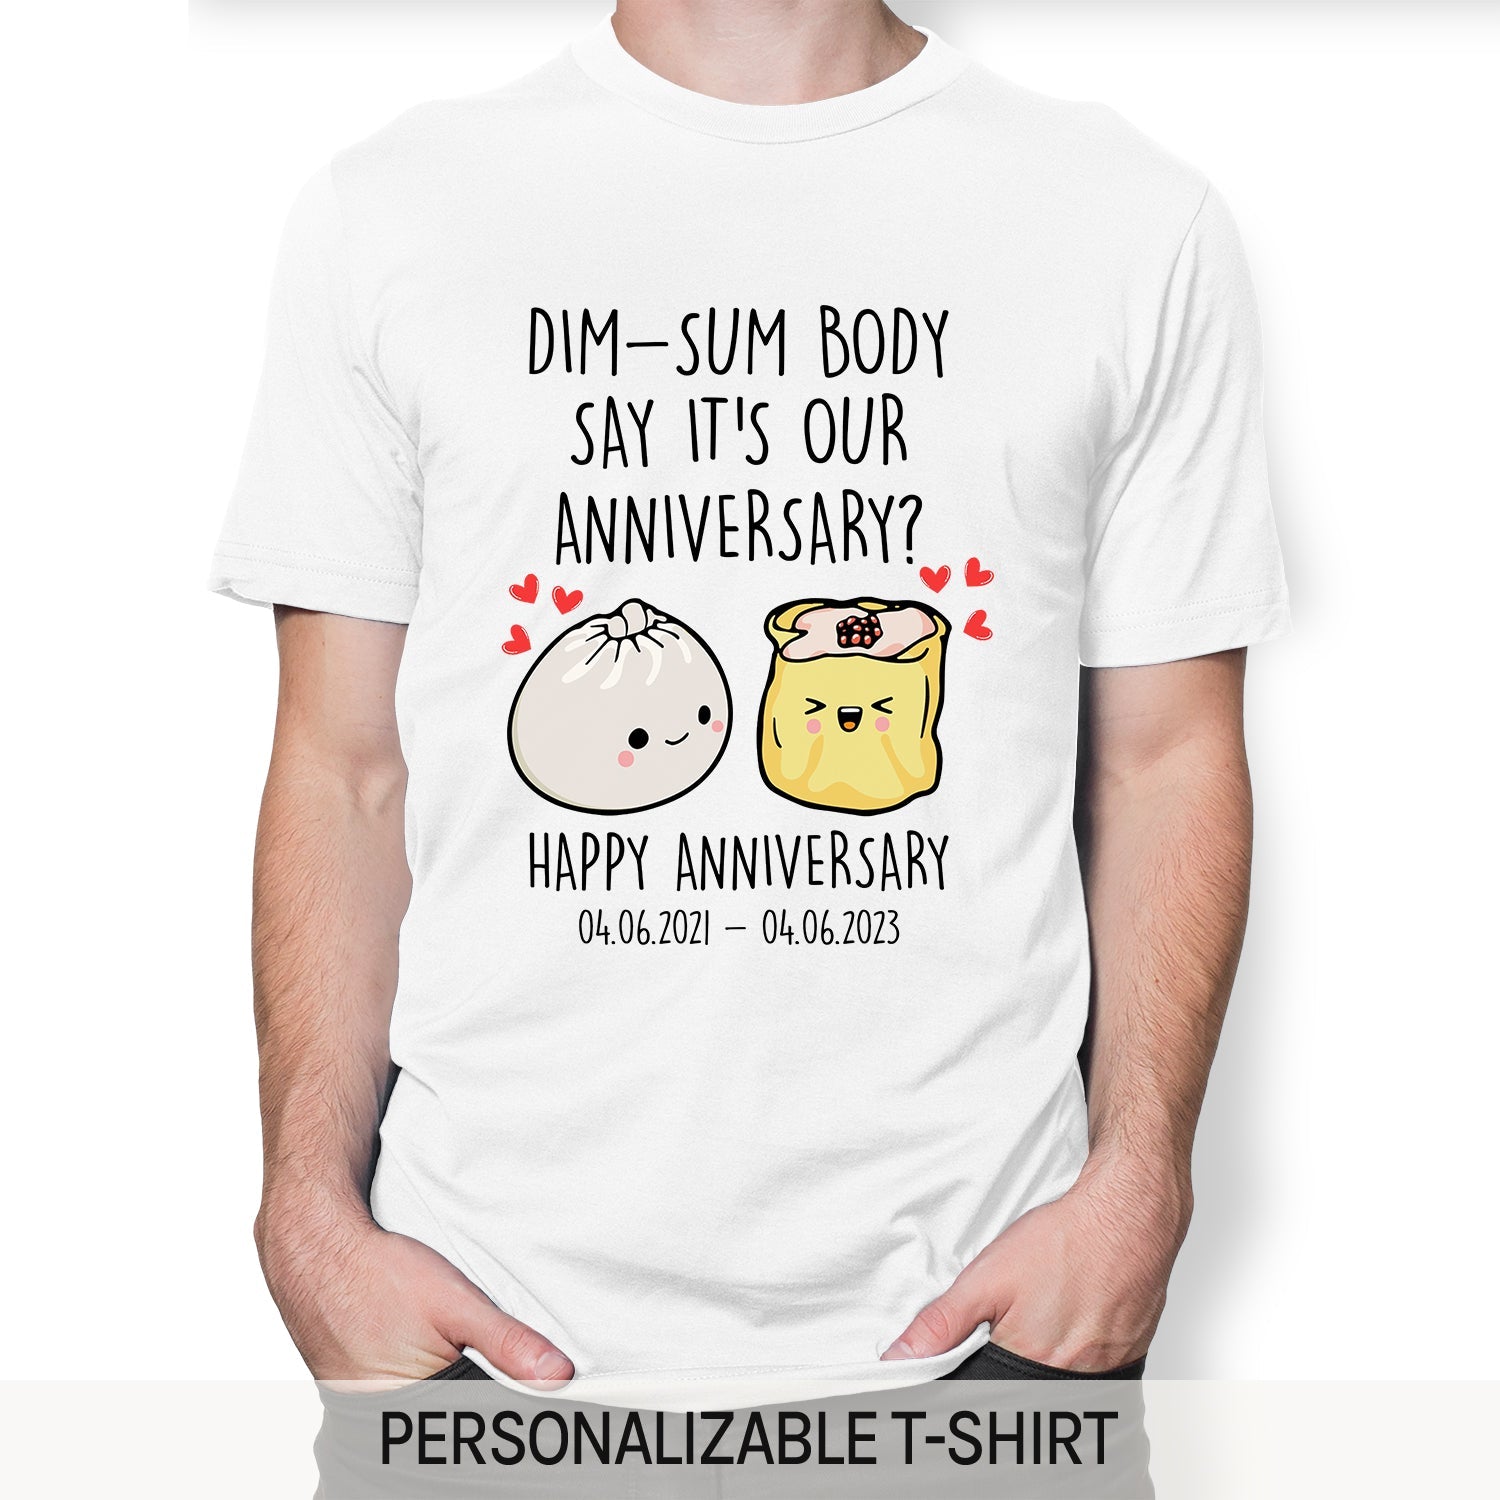 Dim-sum Body Say It's Our Anniversary? - Personalized Anniversary gift for him for her - Custom Tshirt - MyMindfulGifts